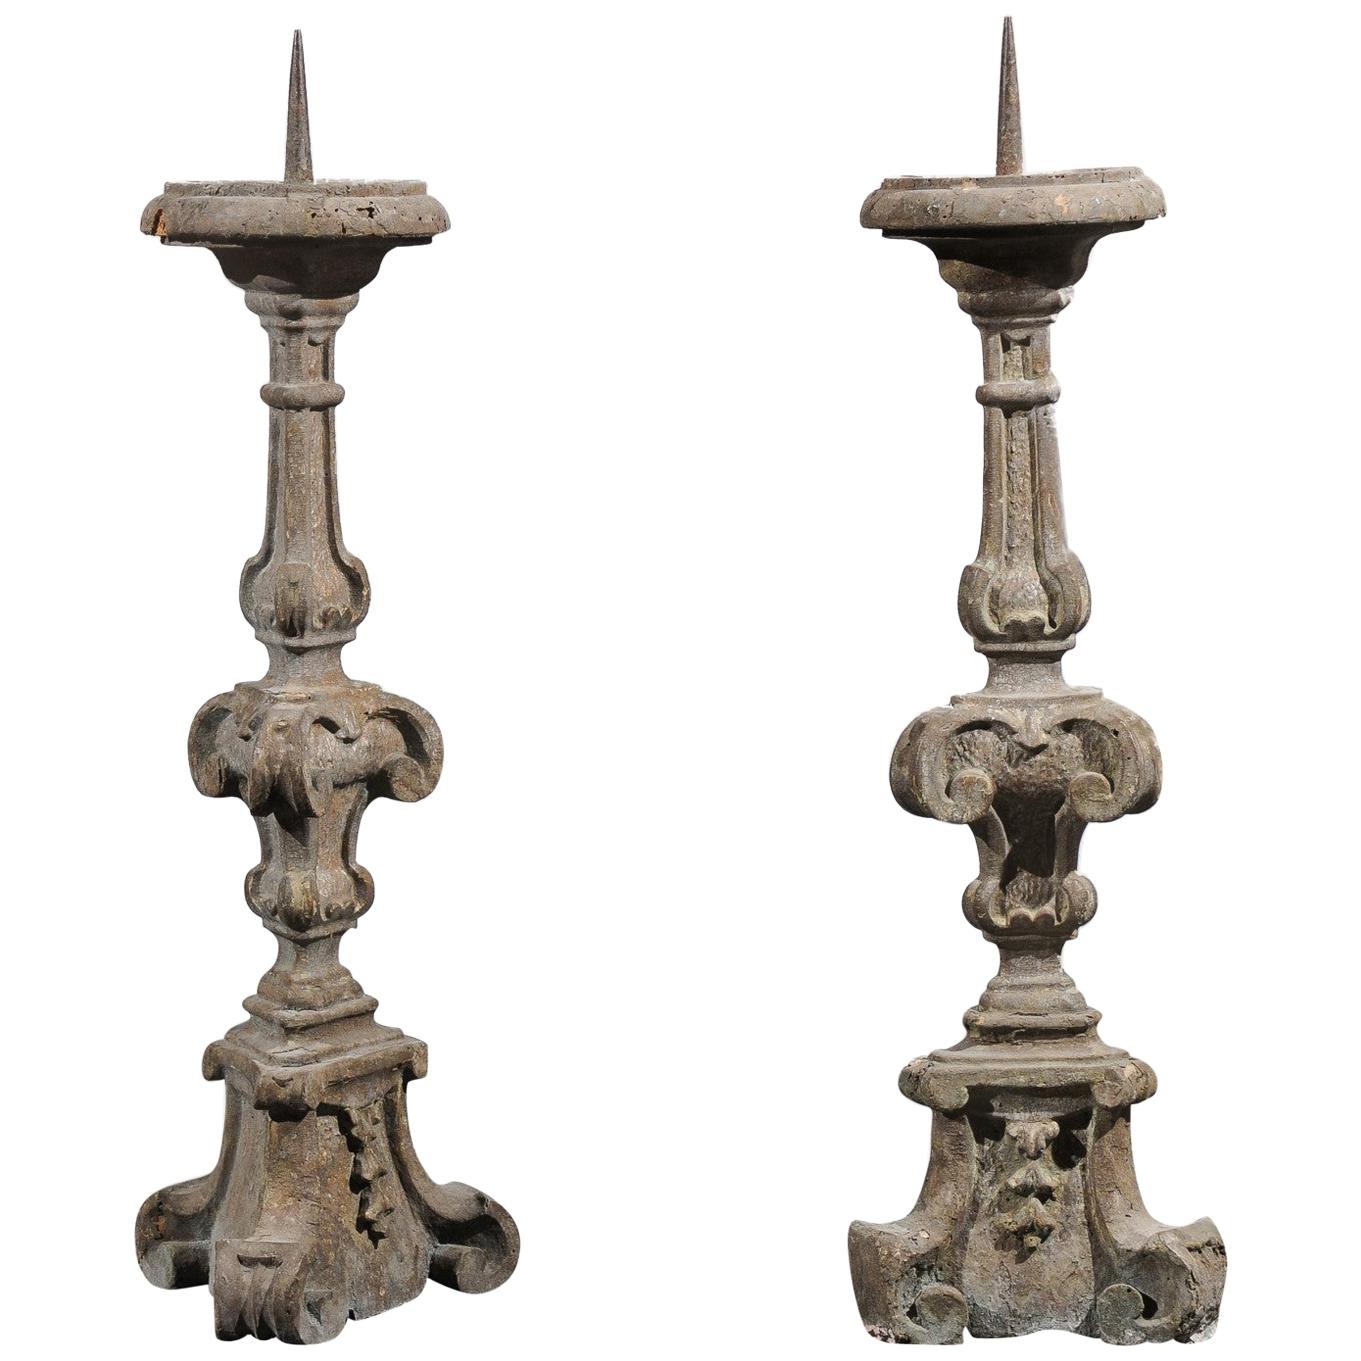 Pair of 18th Century French Hand-Carved and Painted Altar Sticks with Volutes